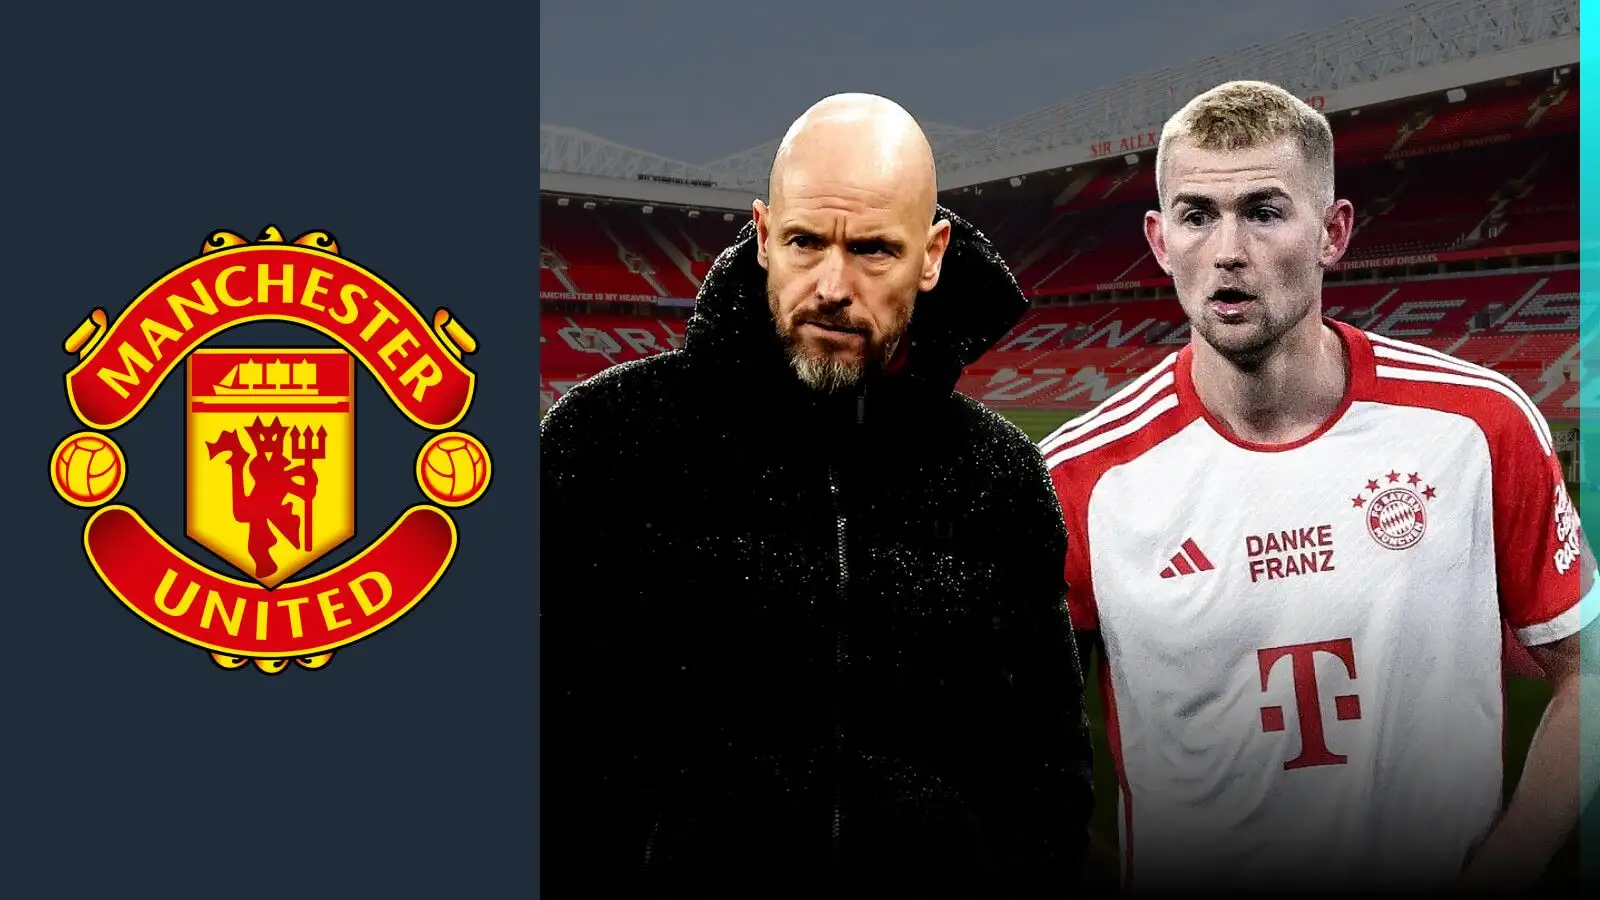 Man Utd is negotiating terms to secure a contract with Bayern Munich's £42.7 million star Matthijs de Ligt